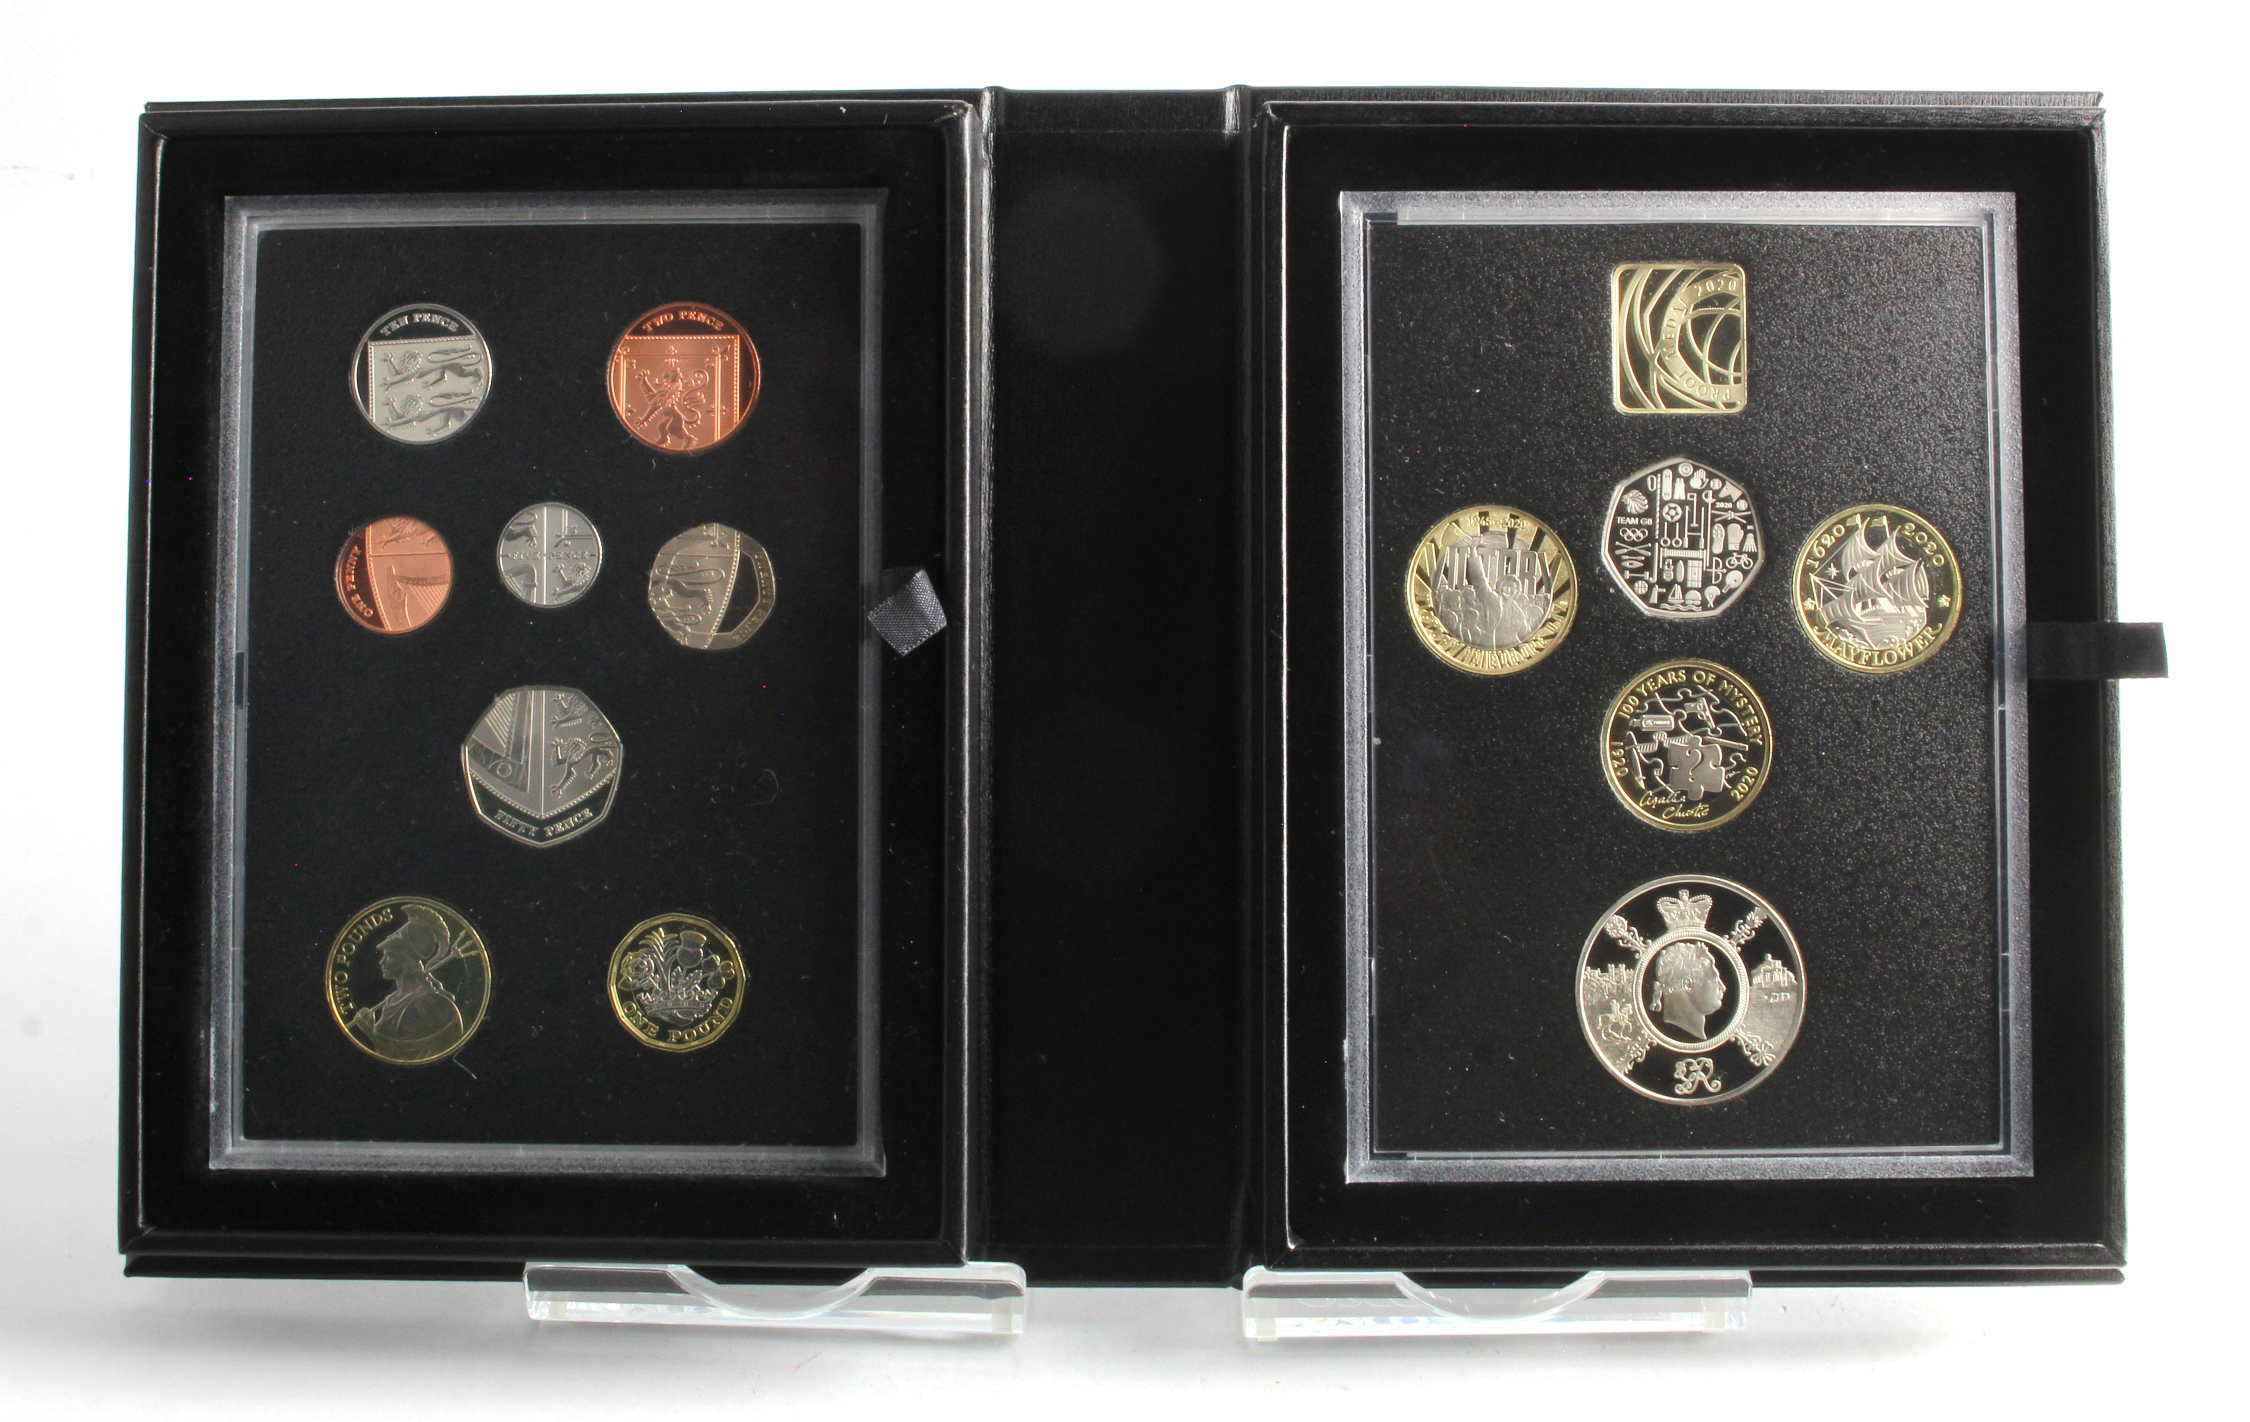 Proof Set 2020. The thirteen coin set (including) commemoratives). FDC as issued